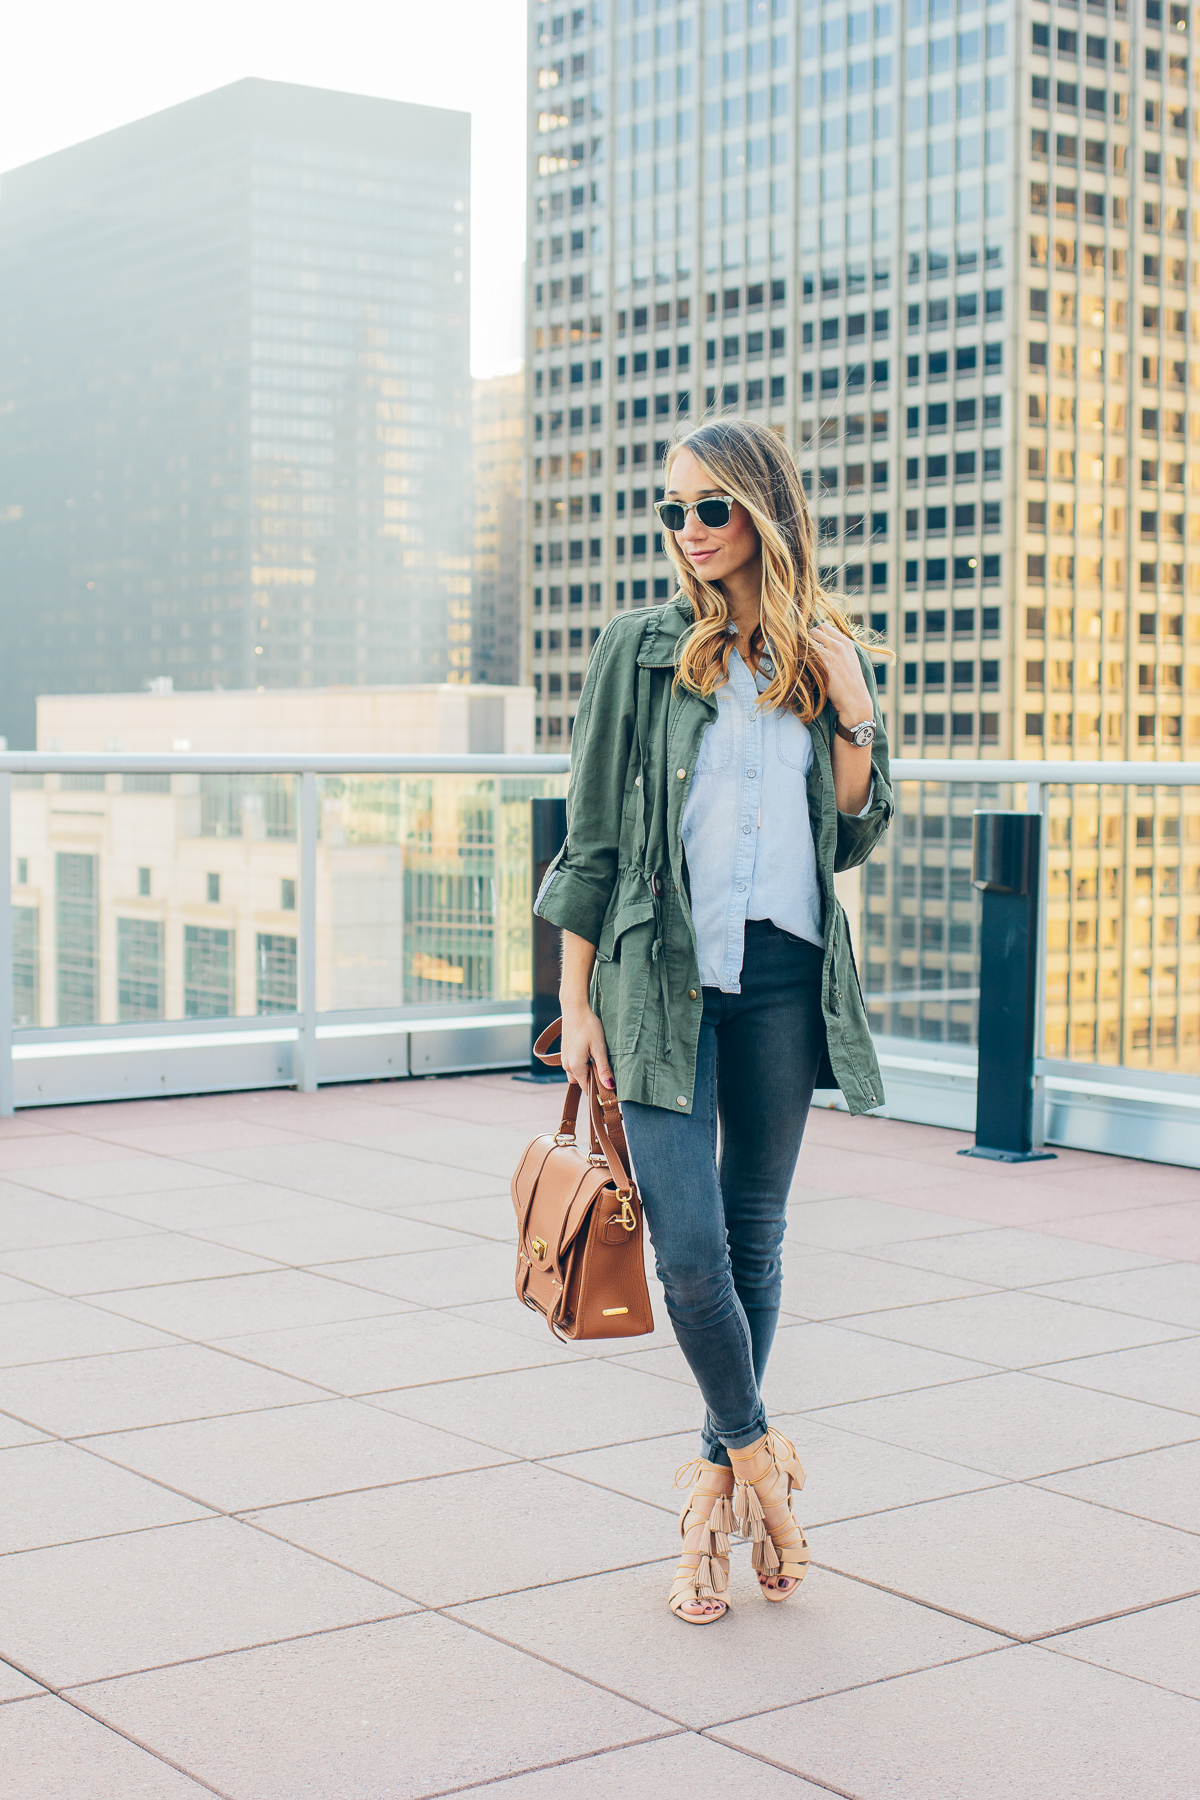 tassel sandals, military jacket, chambray, casual outfit — via @TheFoxandShe